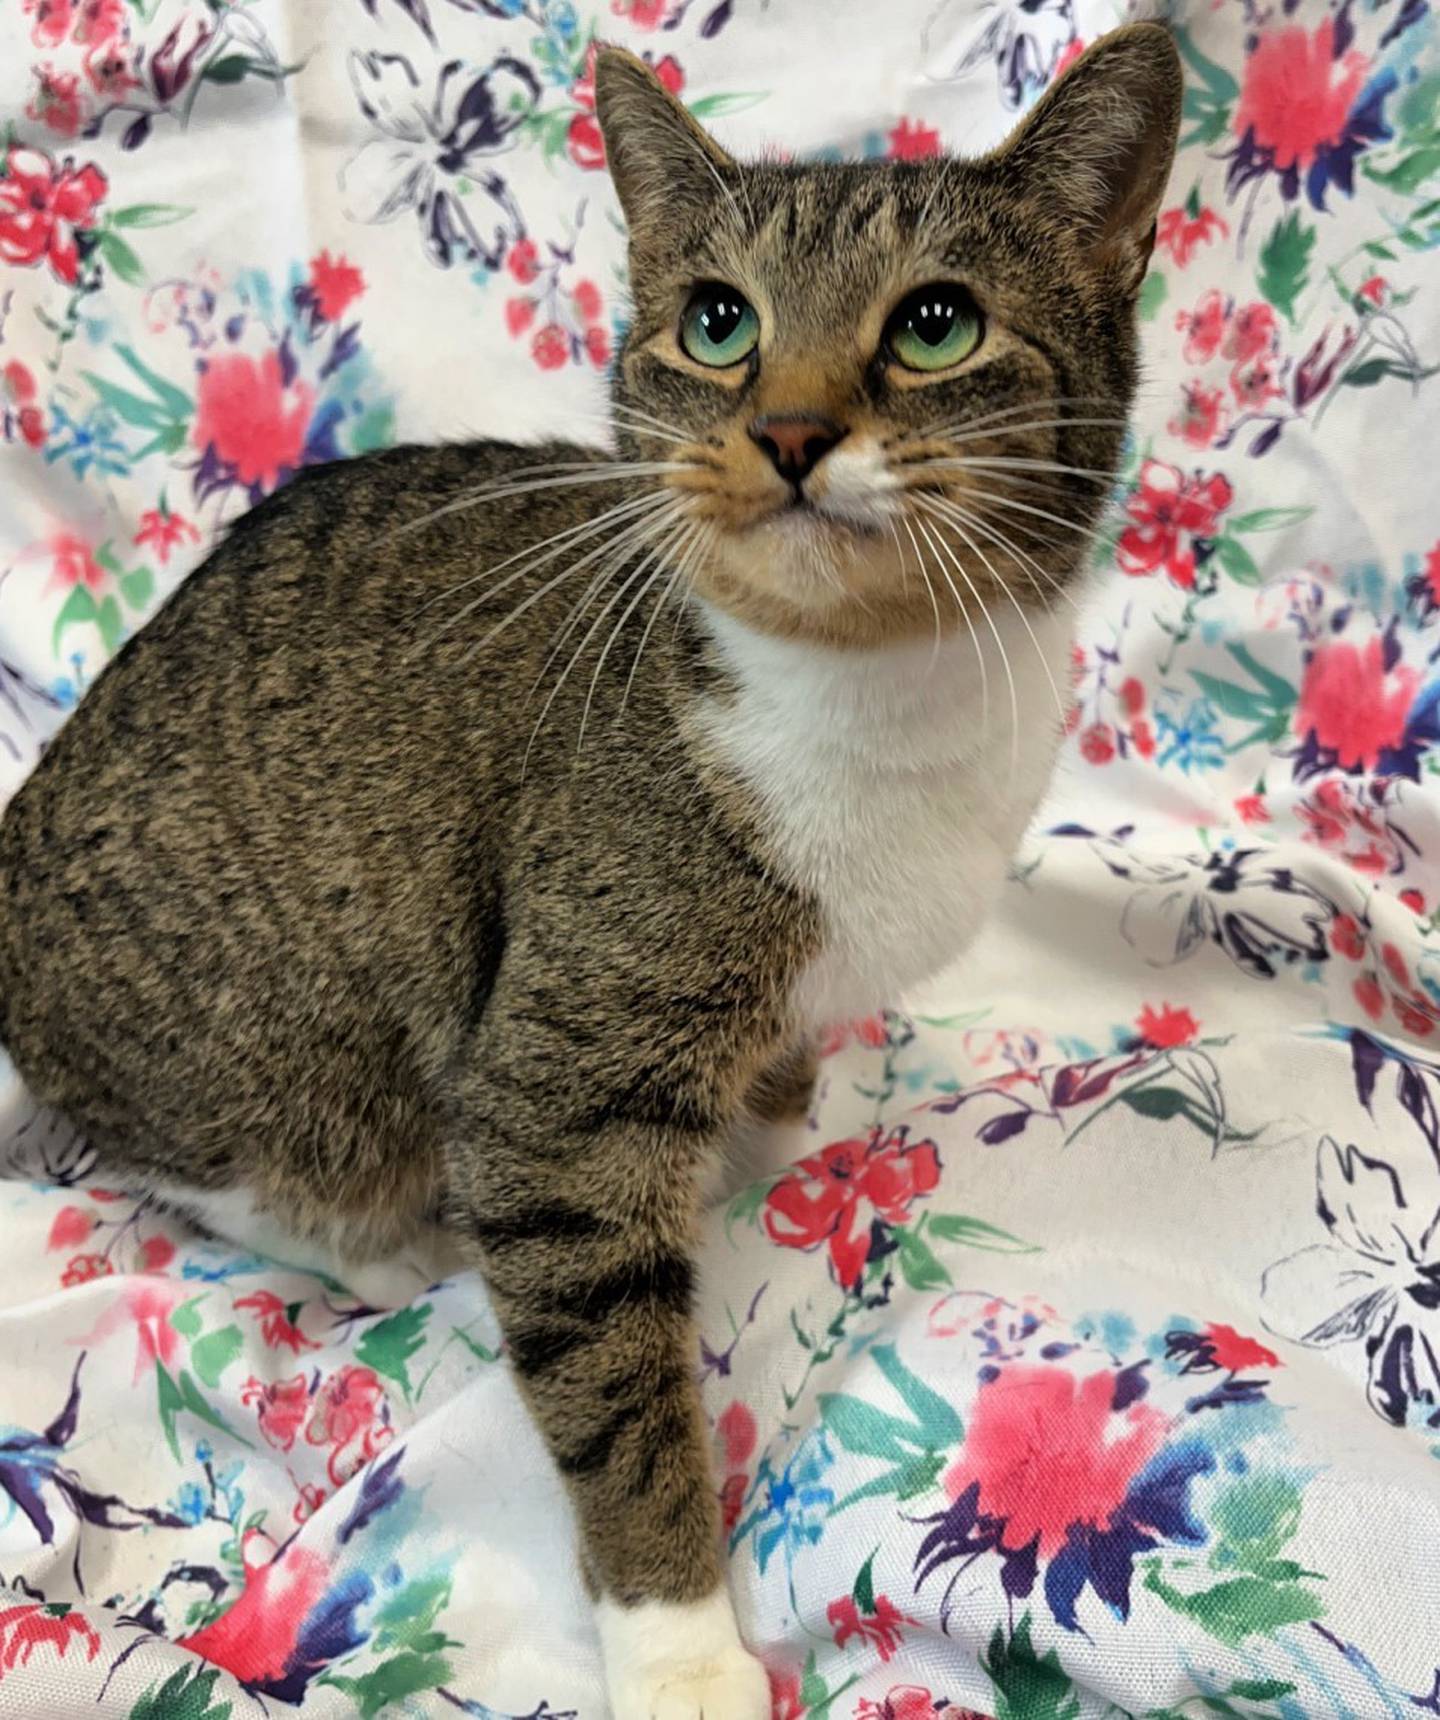 Two-year-old Momo is very friendly and loves attention. Momo has done well with cats, so she’d be fine with a feline friend or two if properly introduced. She likes to explore her surroundings and she especially loves wet food. To meet Momo, call Joliet Township Animal Control at 815-725-0333.